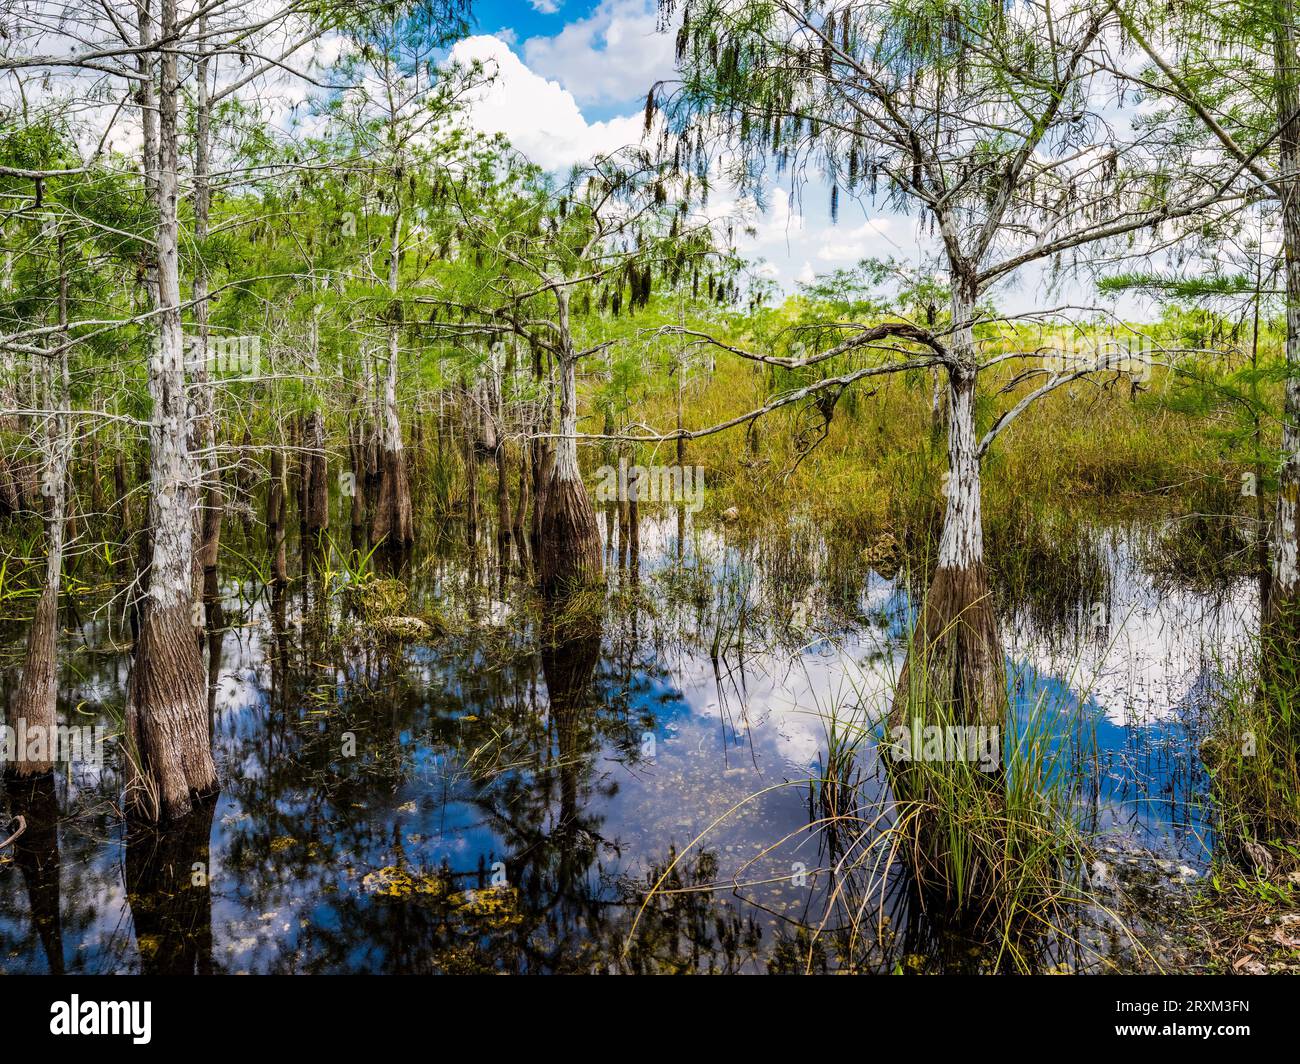 Drawf Cypress tree in Pay-Hay-Okee area of Everglades National Park, Florida, USA Stock Photo